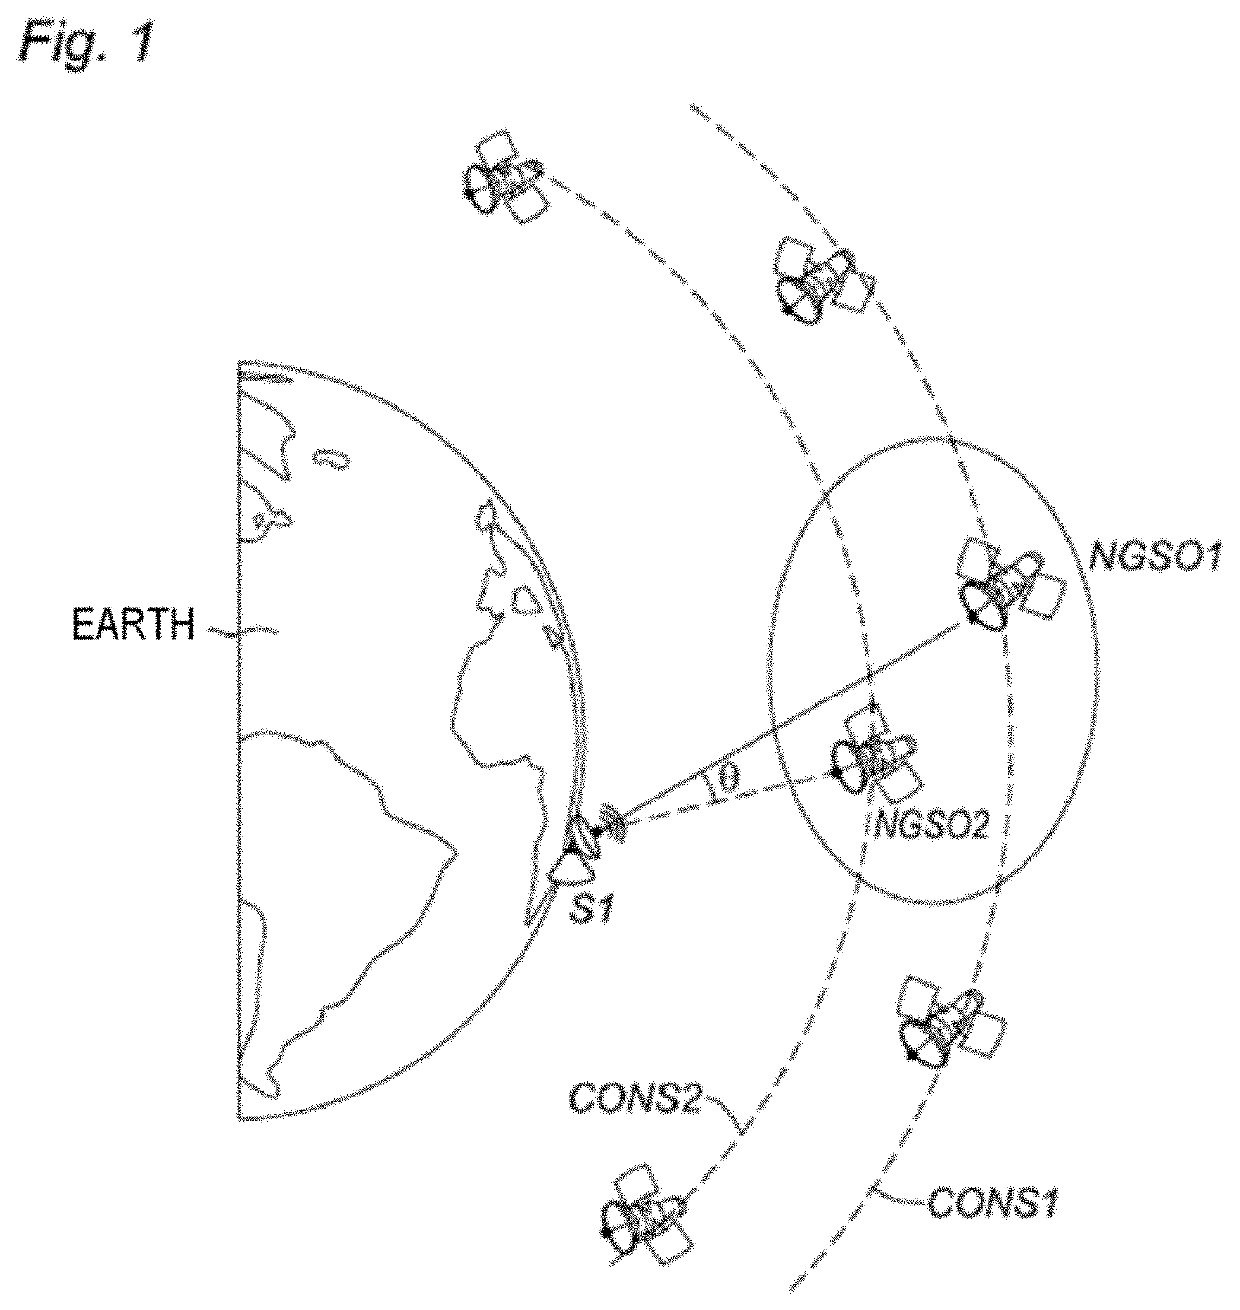 Method for determining constraints of a non-geostationary system with respect to another non-geostationary system